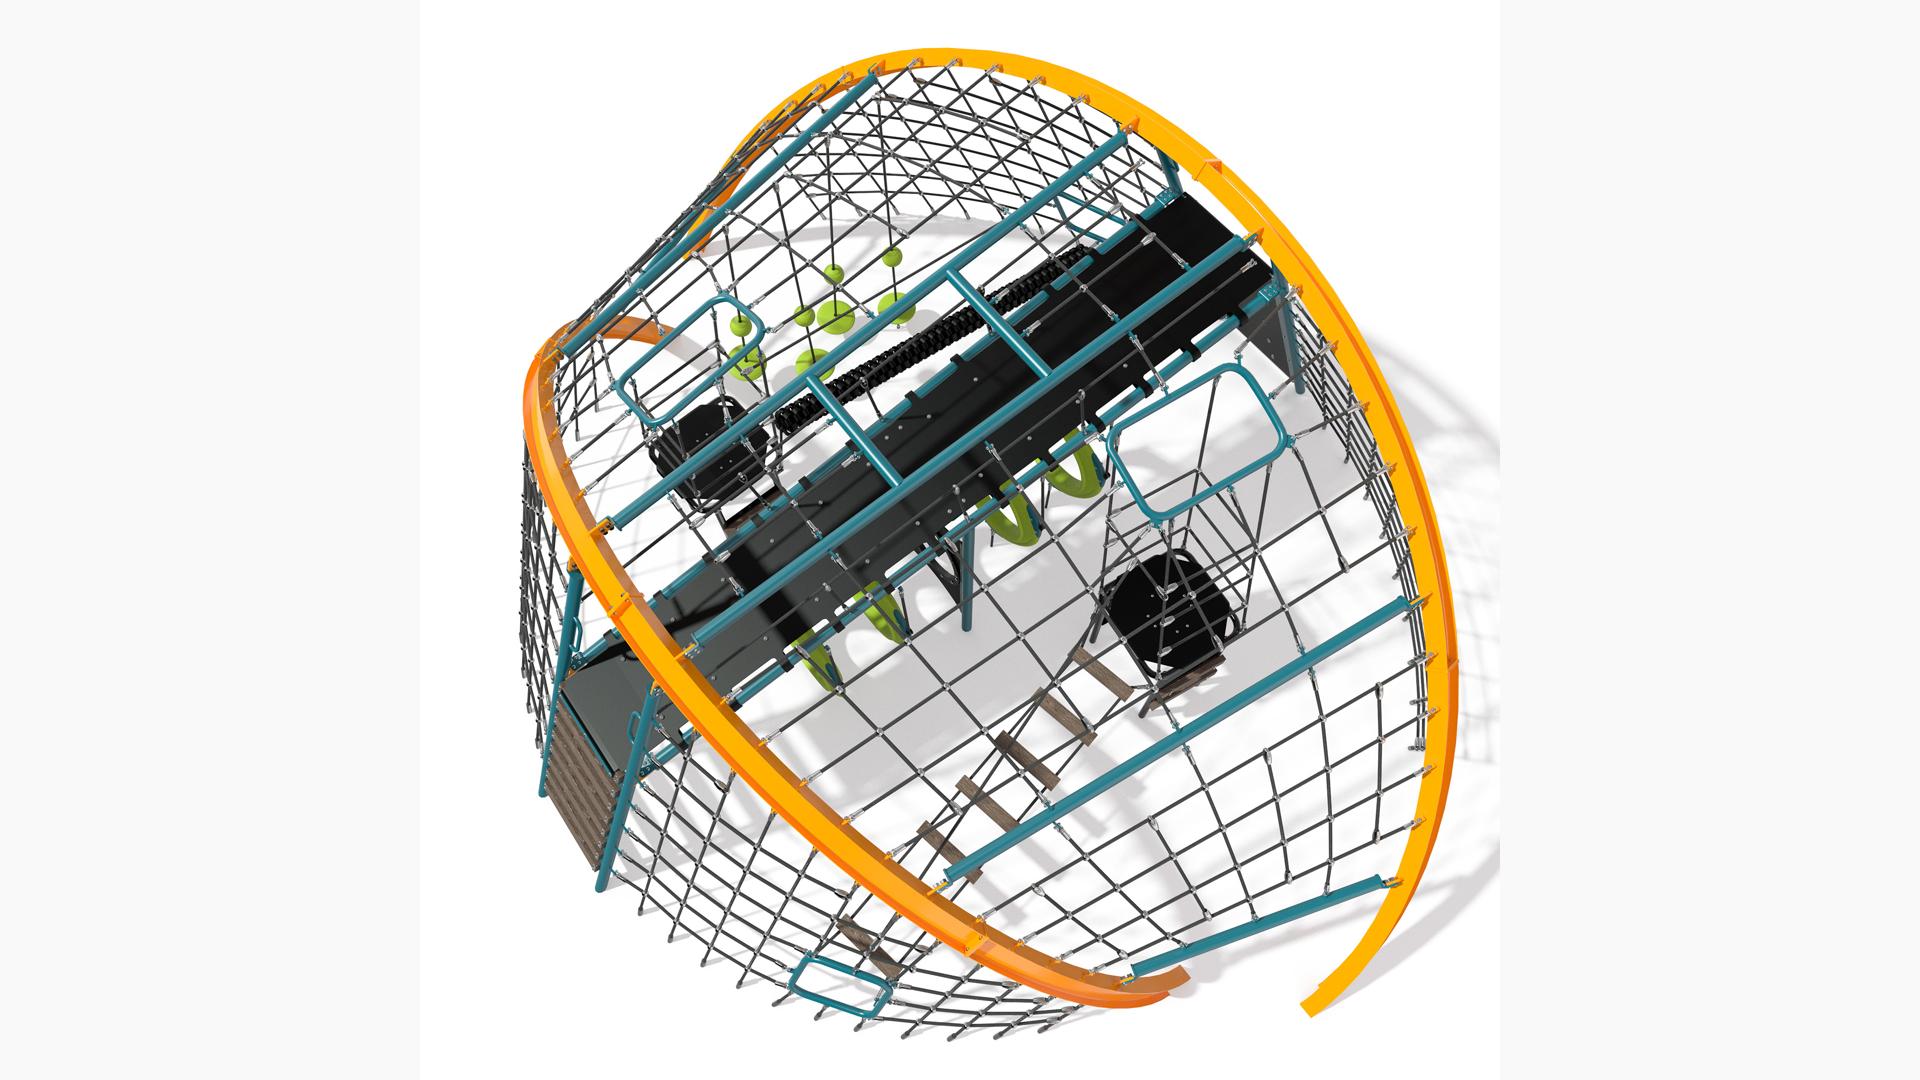 Crab Trap® - Multiple Net Climbing Structure for Playgrounds